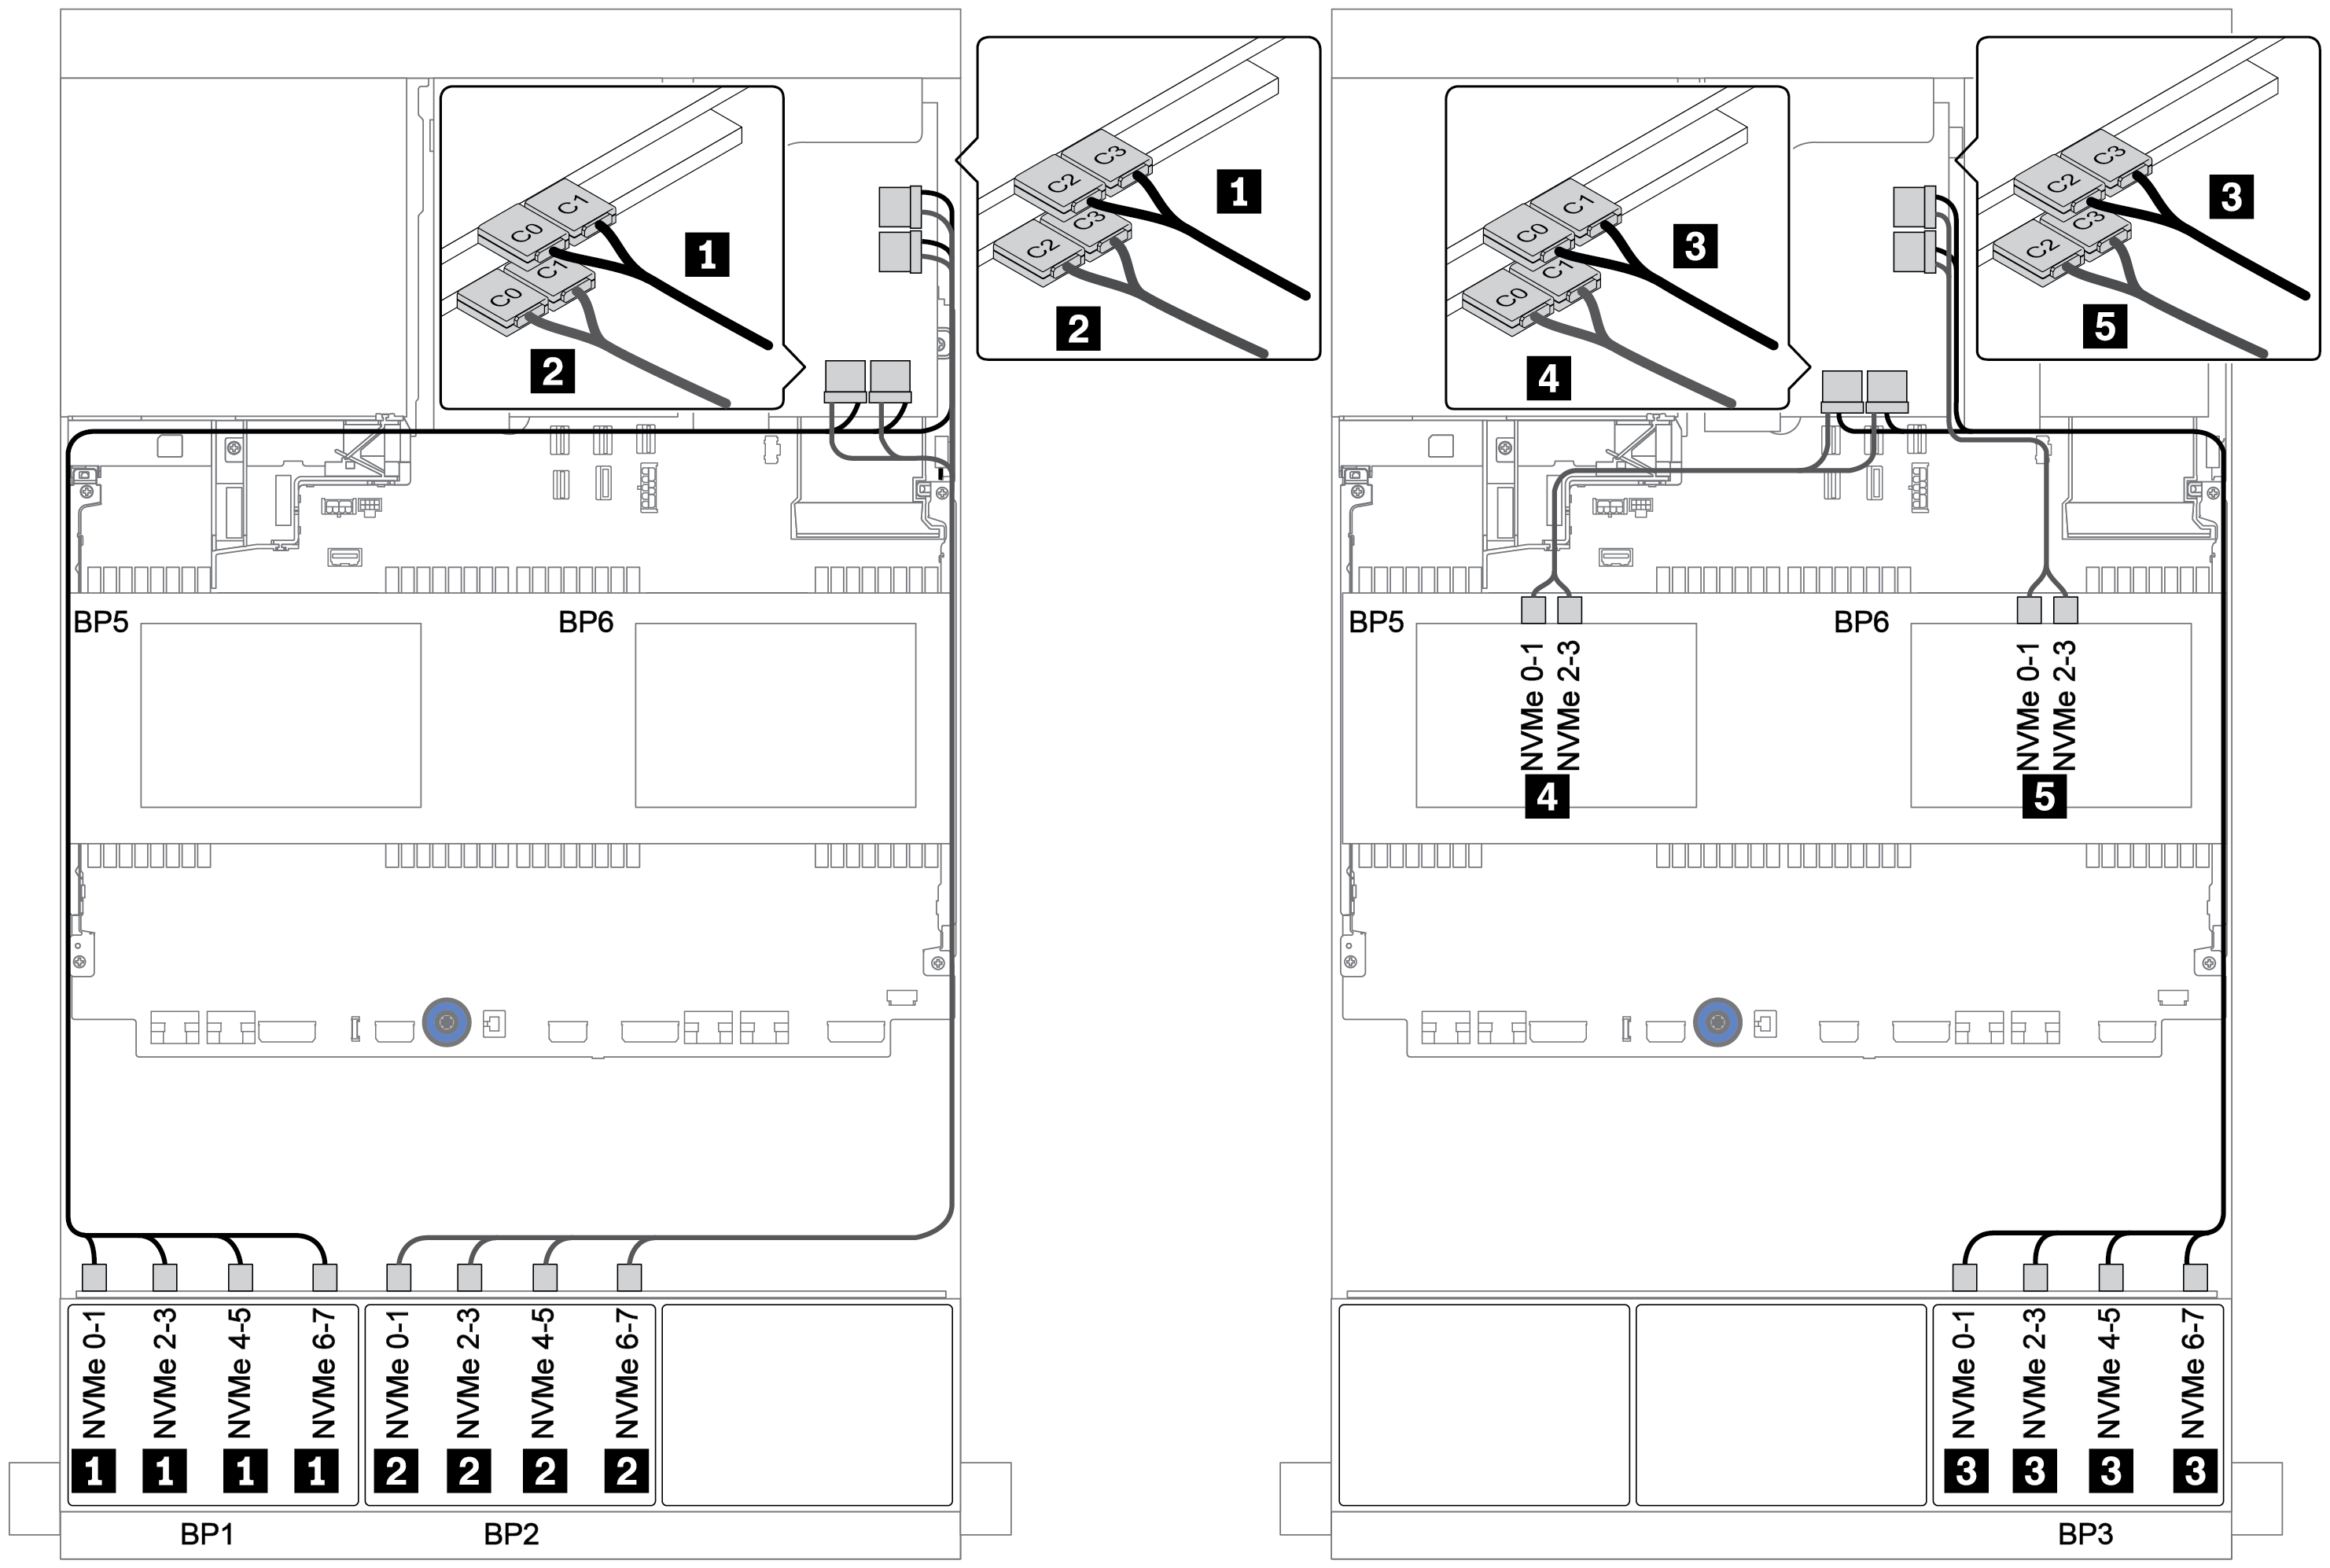 Cable routing for the 32 x 2.5-inch NVMe configuration with four switch cards